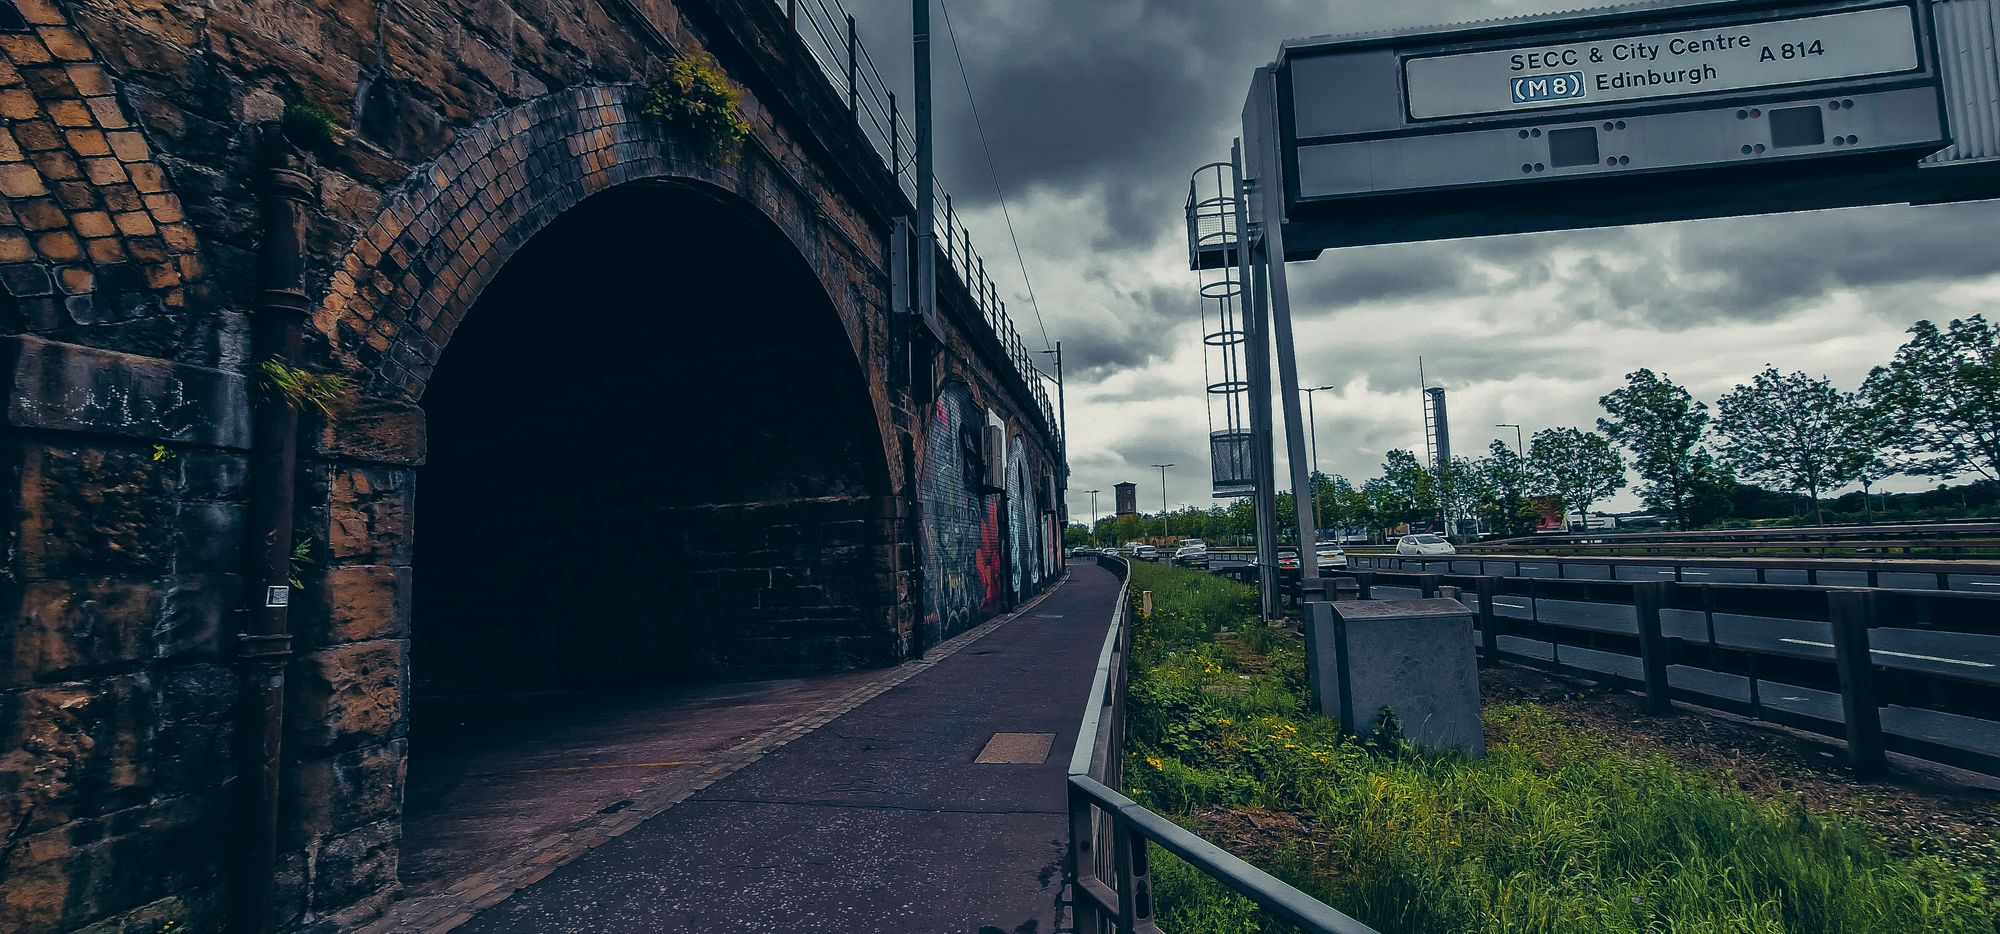 Moody photo of railway arches with graffiti